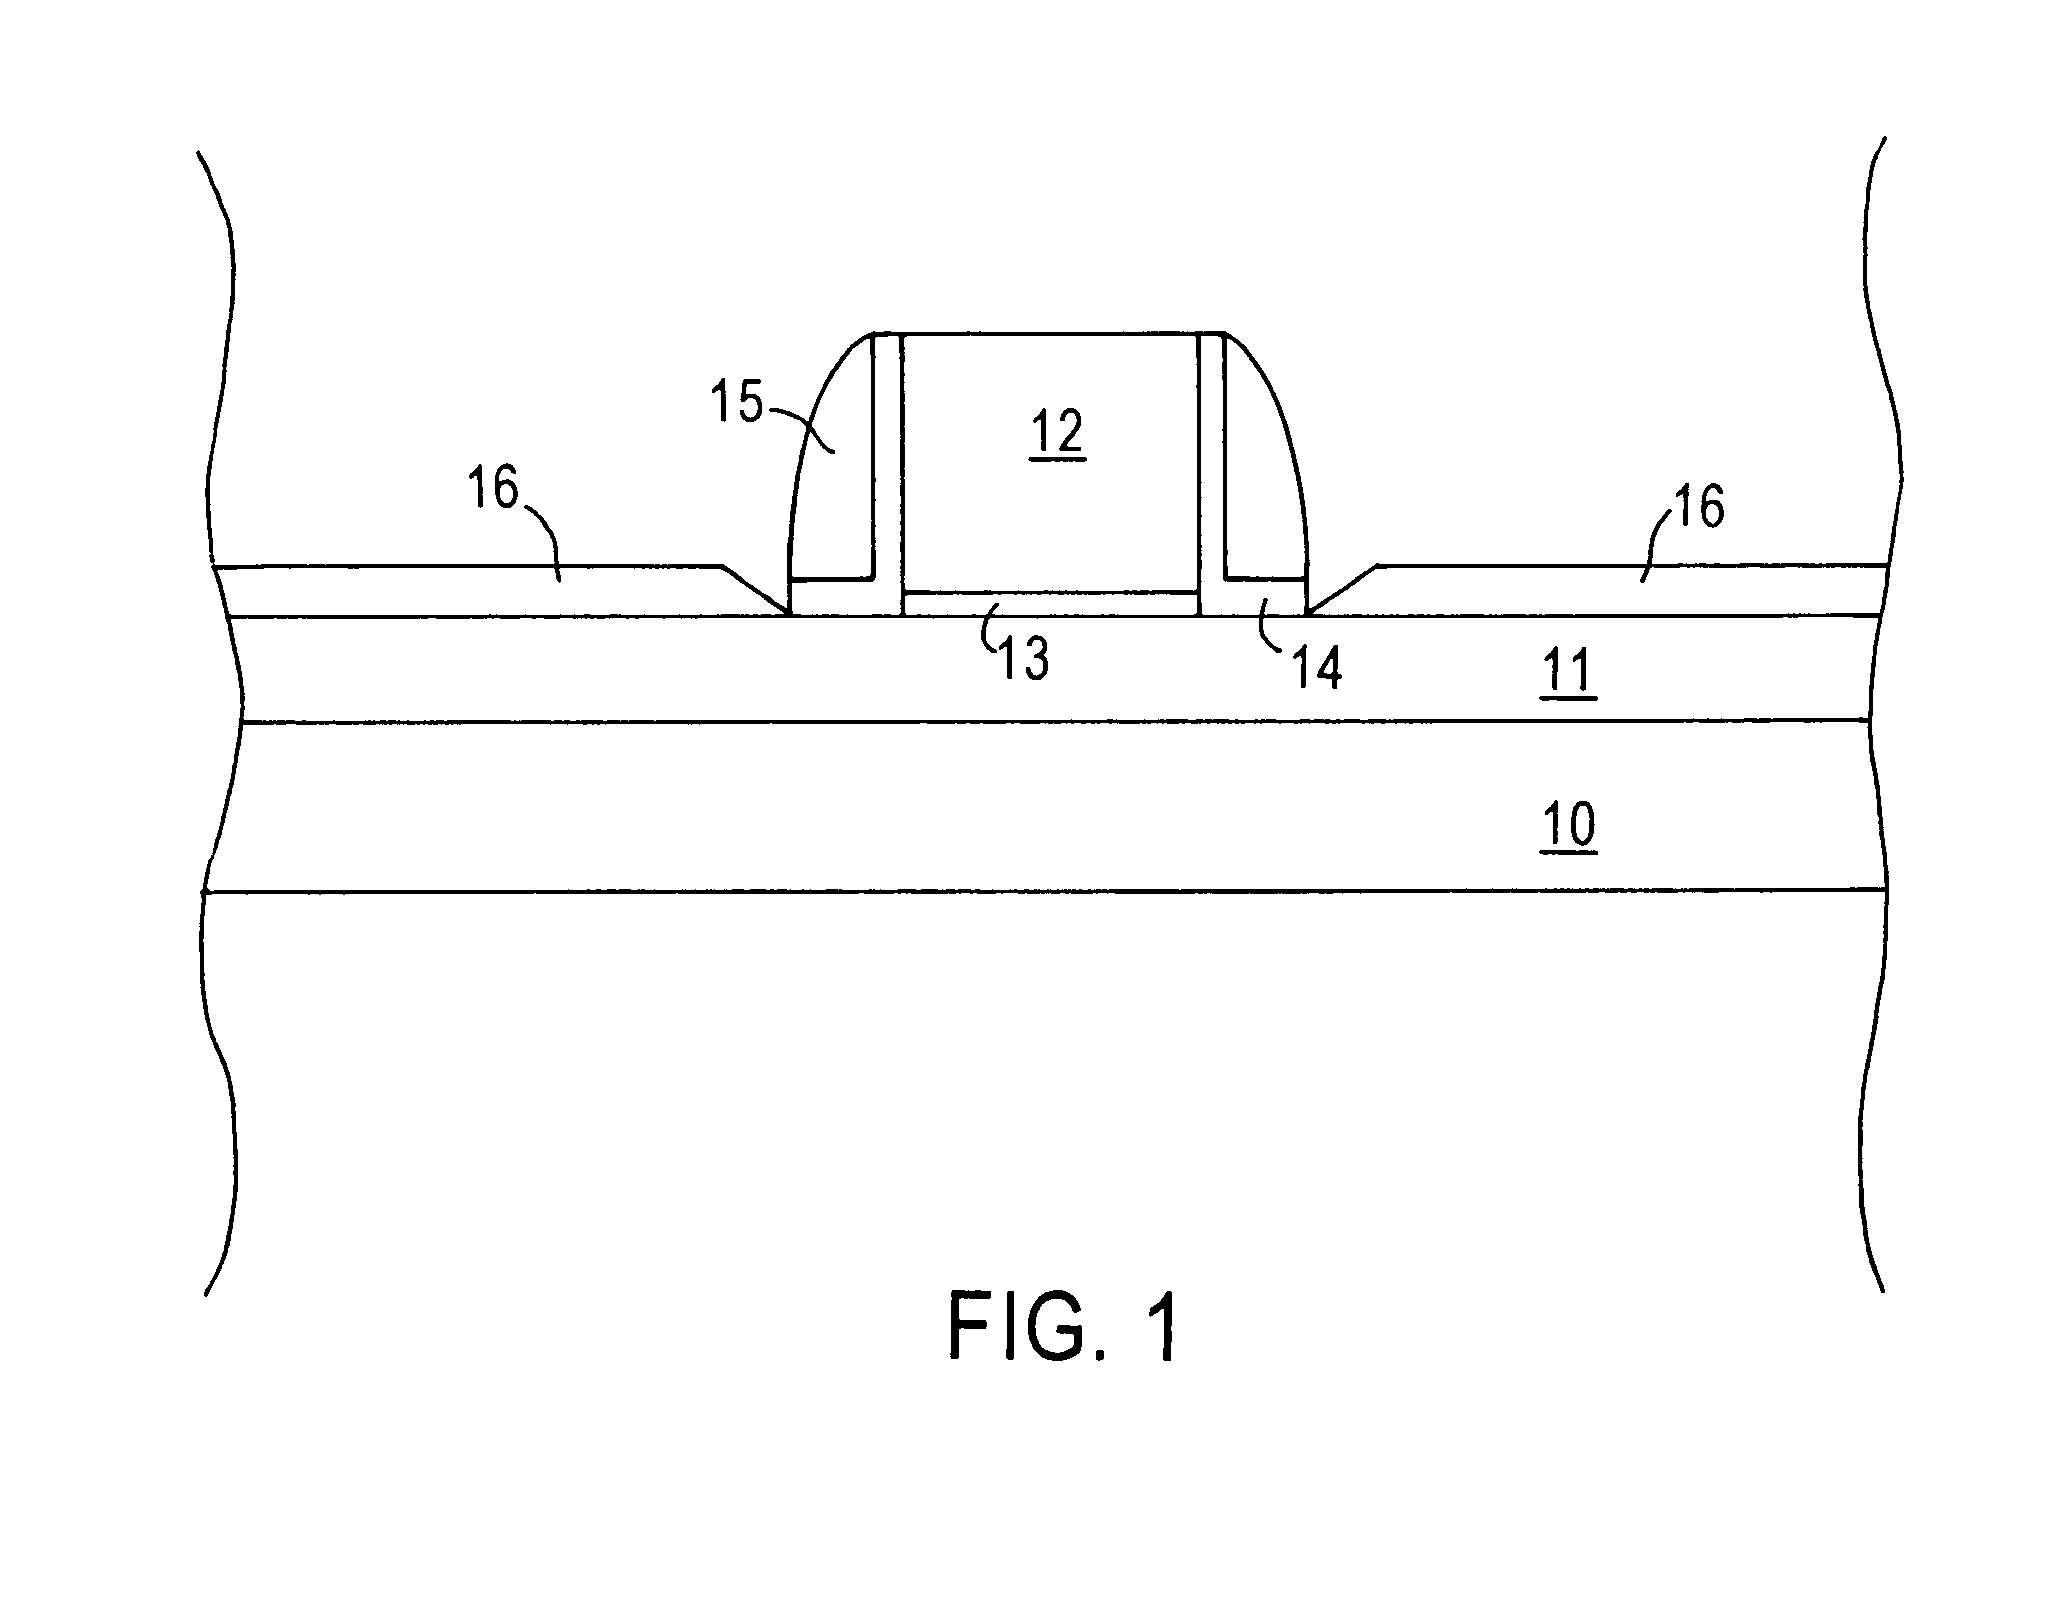 Semiconductor device based on Si-Ge with high stress liner for enhanced channel carrier mobility